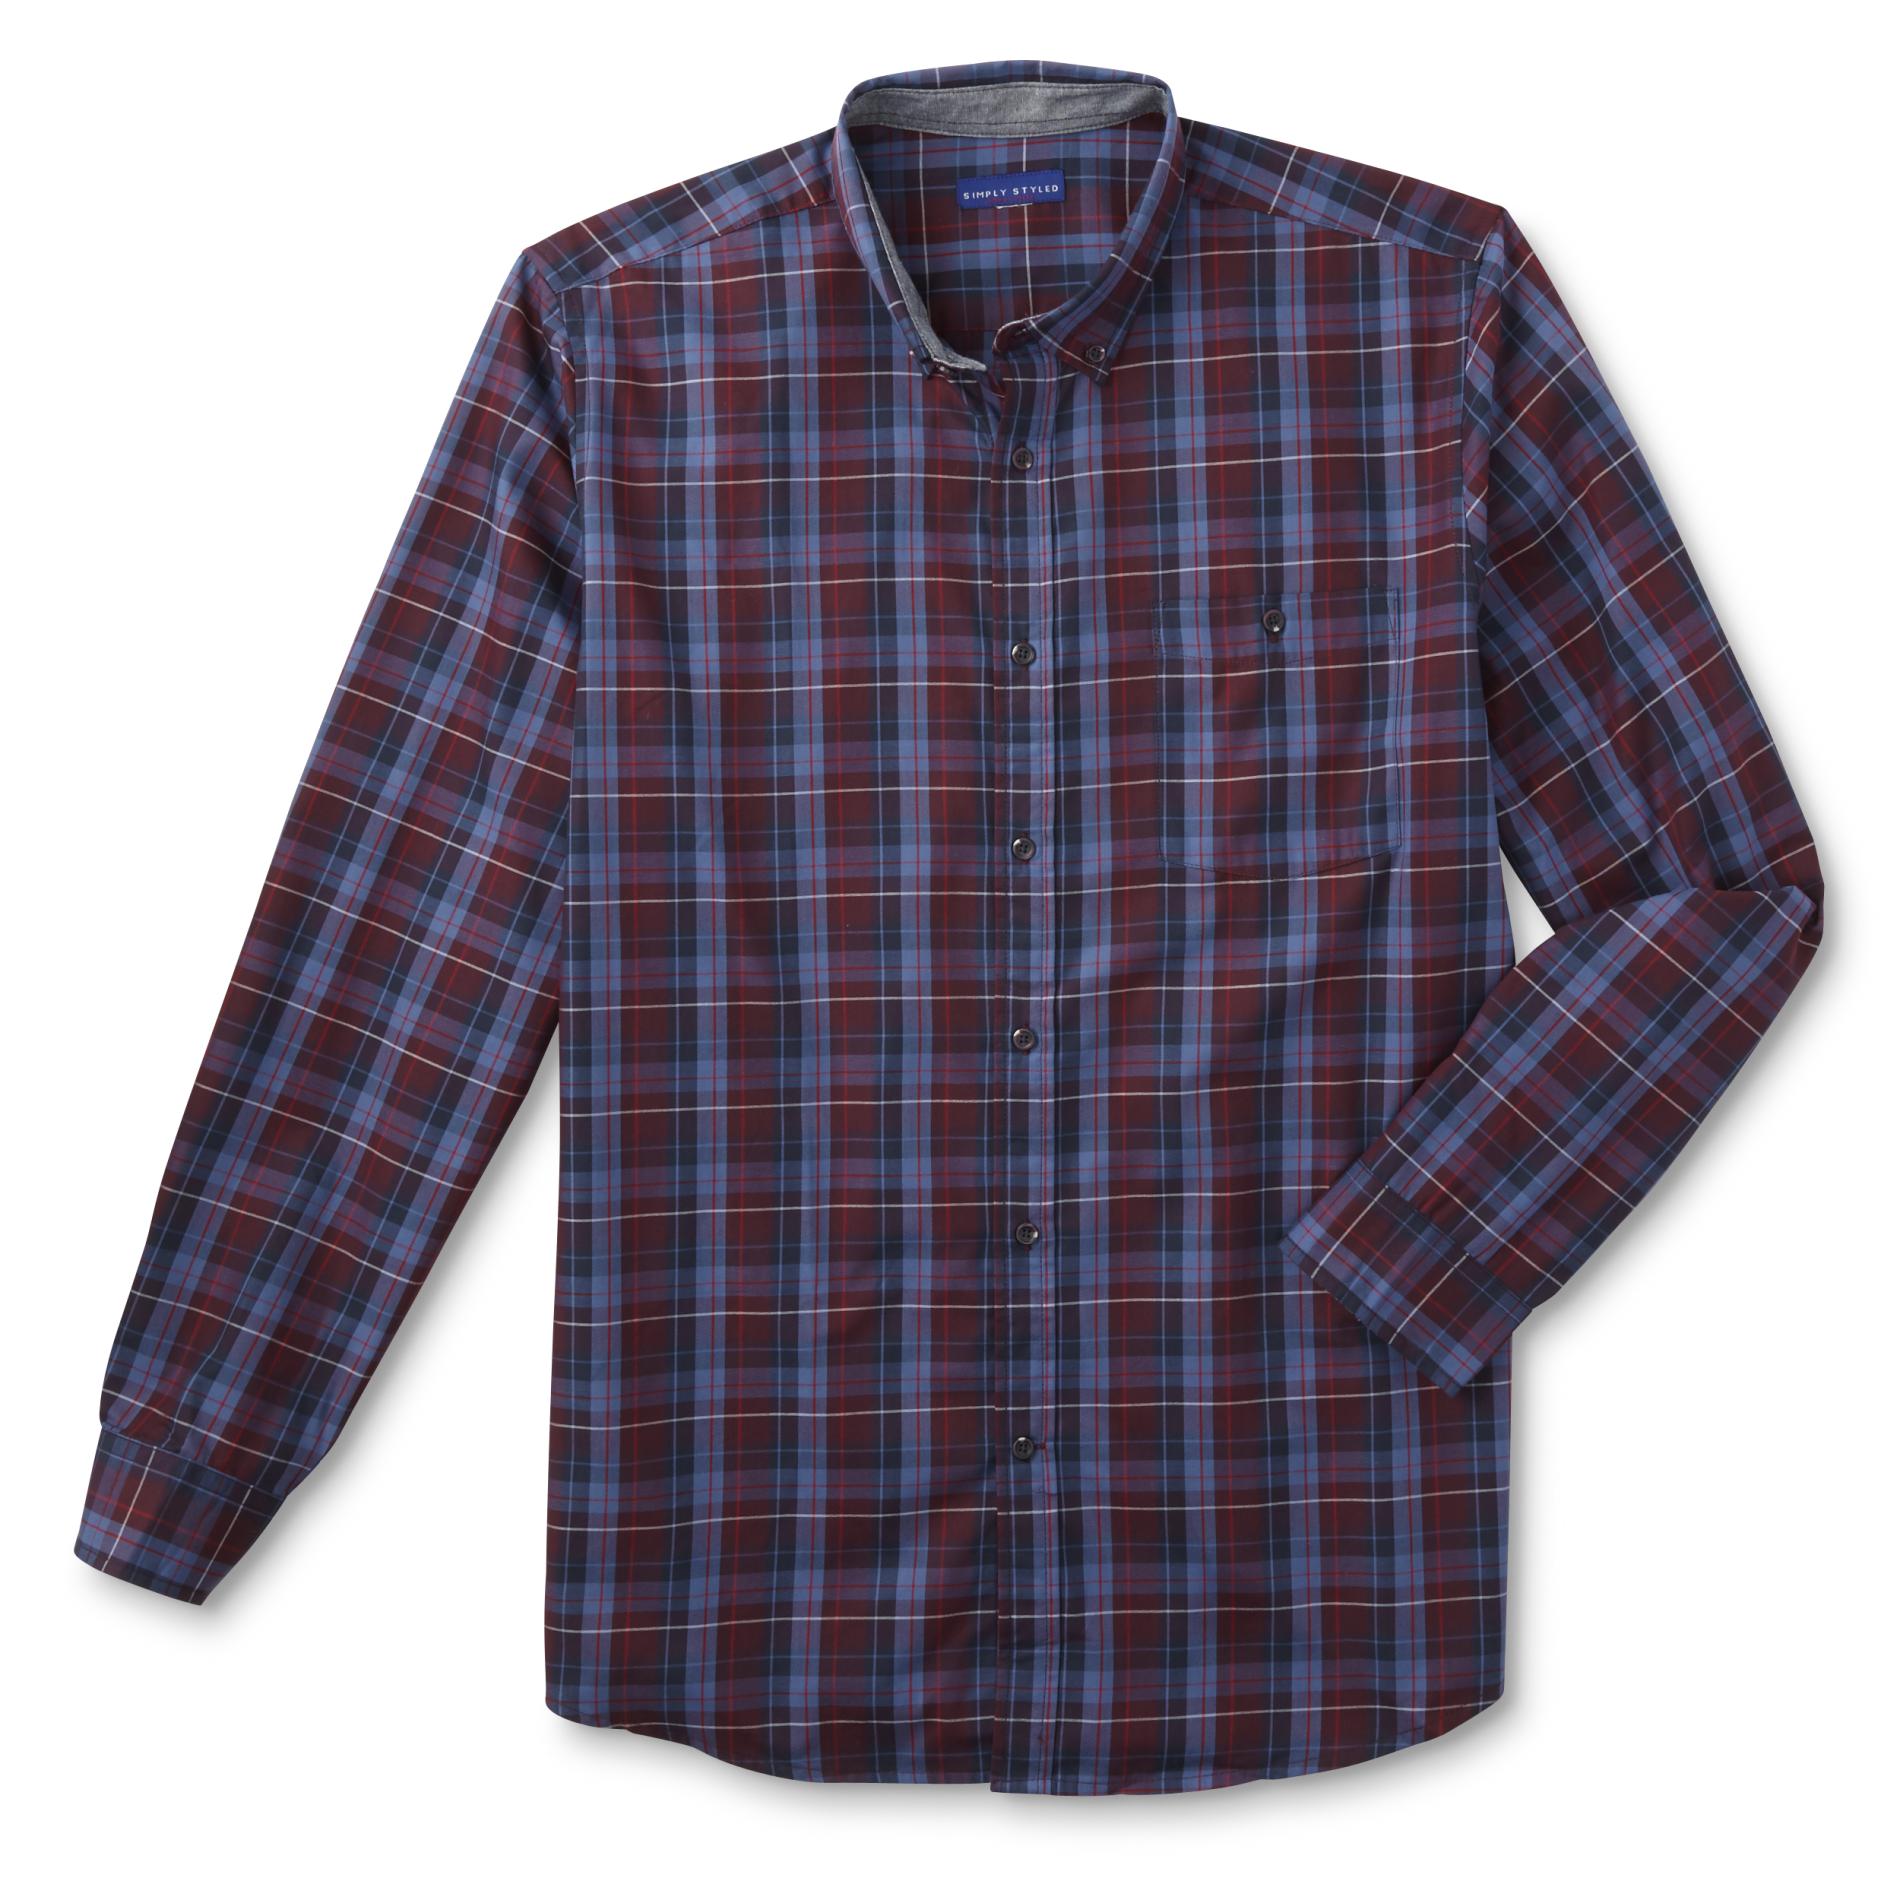 Simply Styled Men's Big & Tall Button-Front Shirt - Plaid